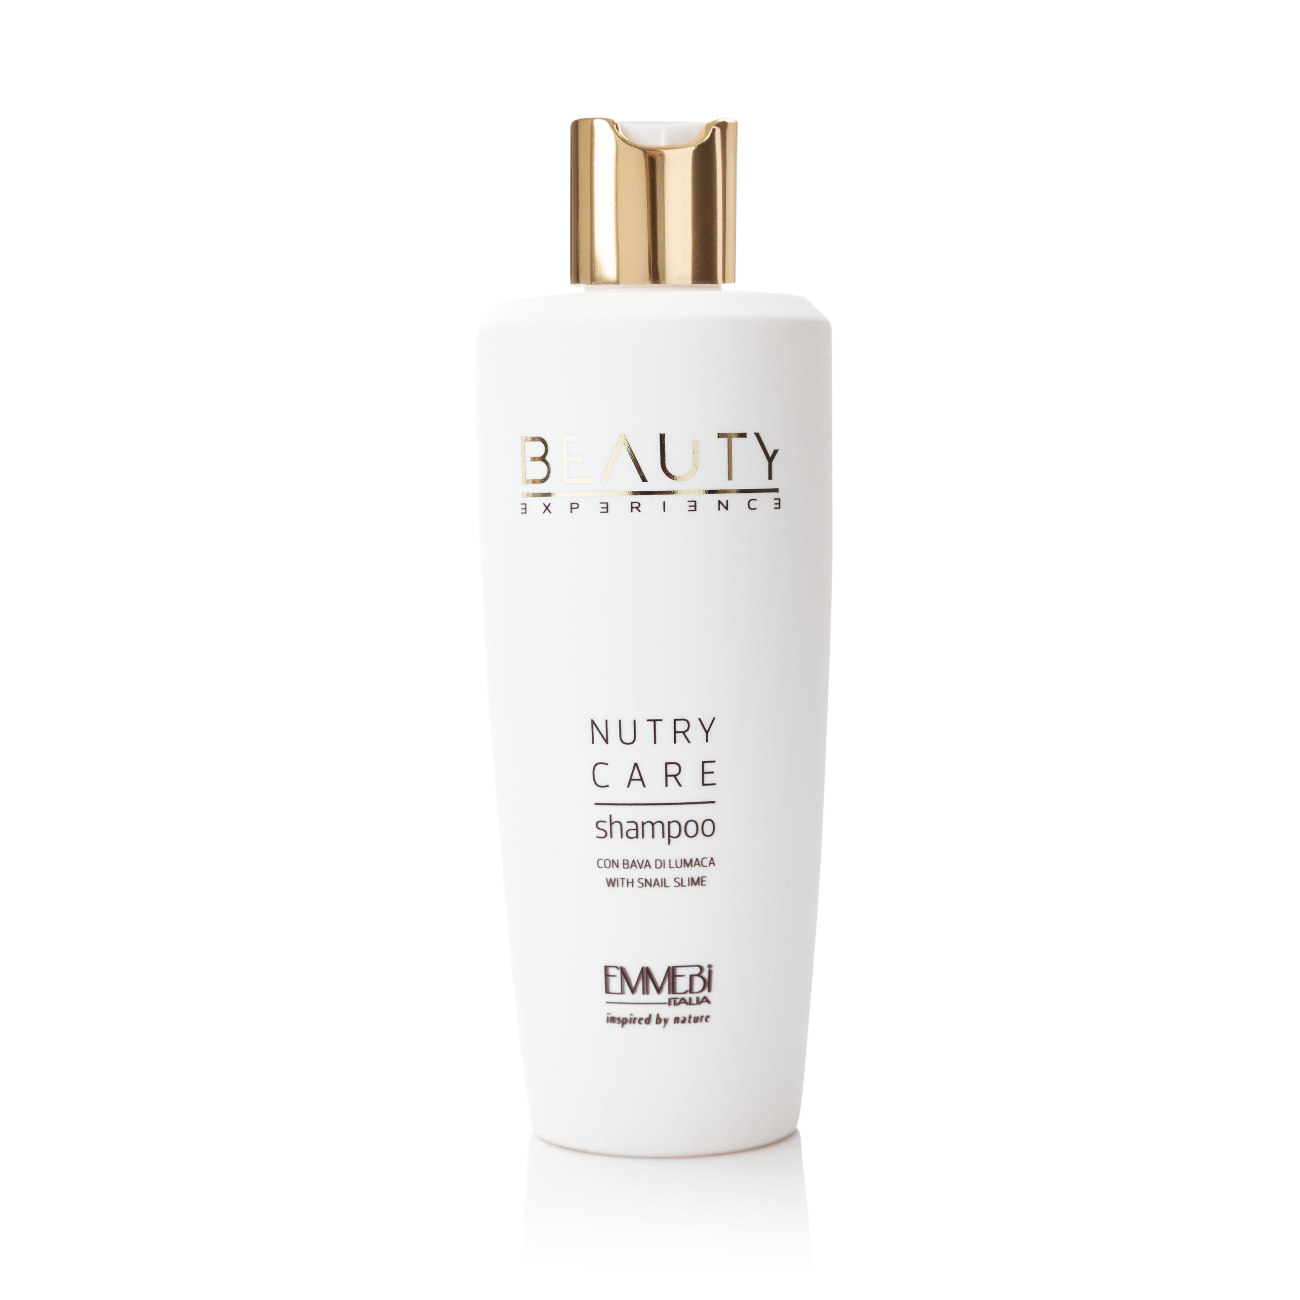 Nutry Care Shampoo - Snail Slime Shampoo for brittle and dry hair Emmebi 300ml